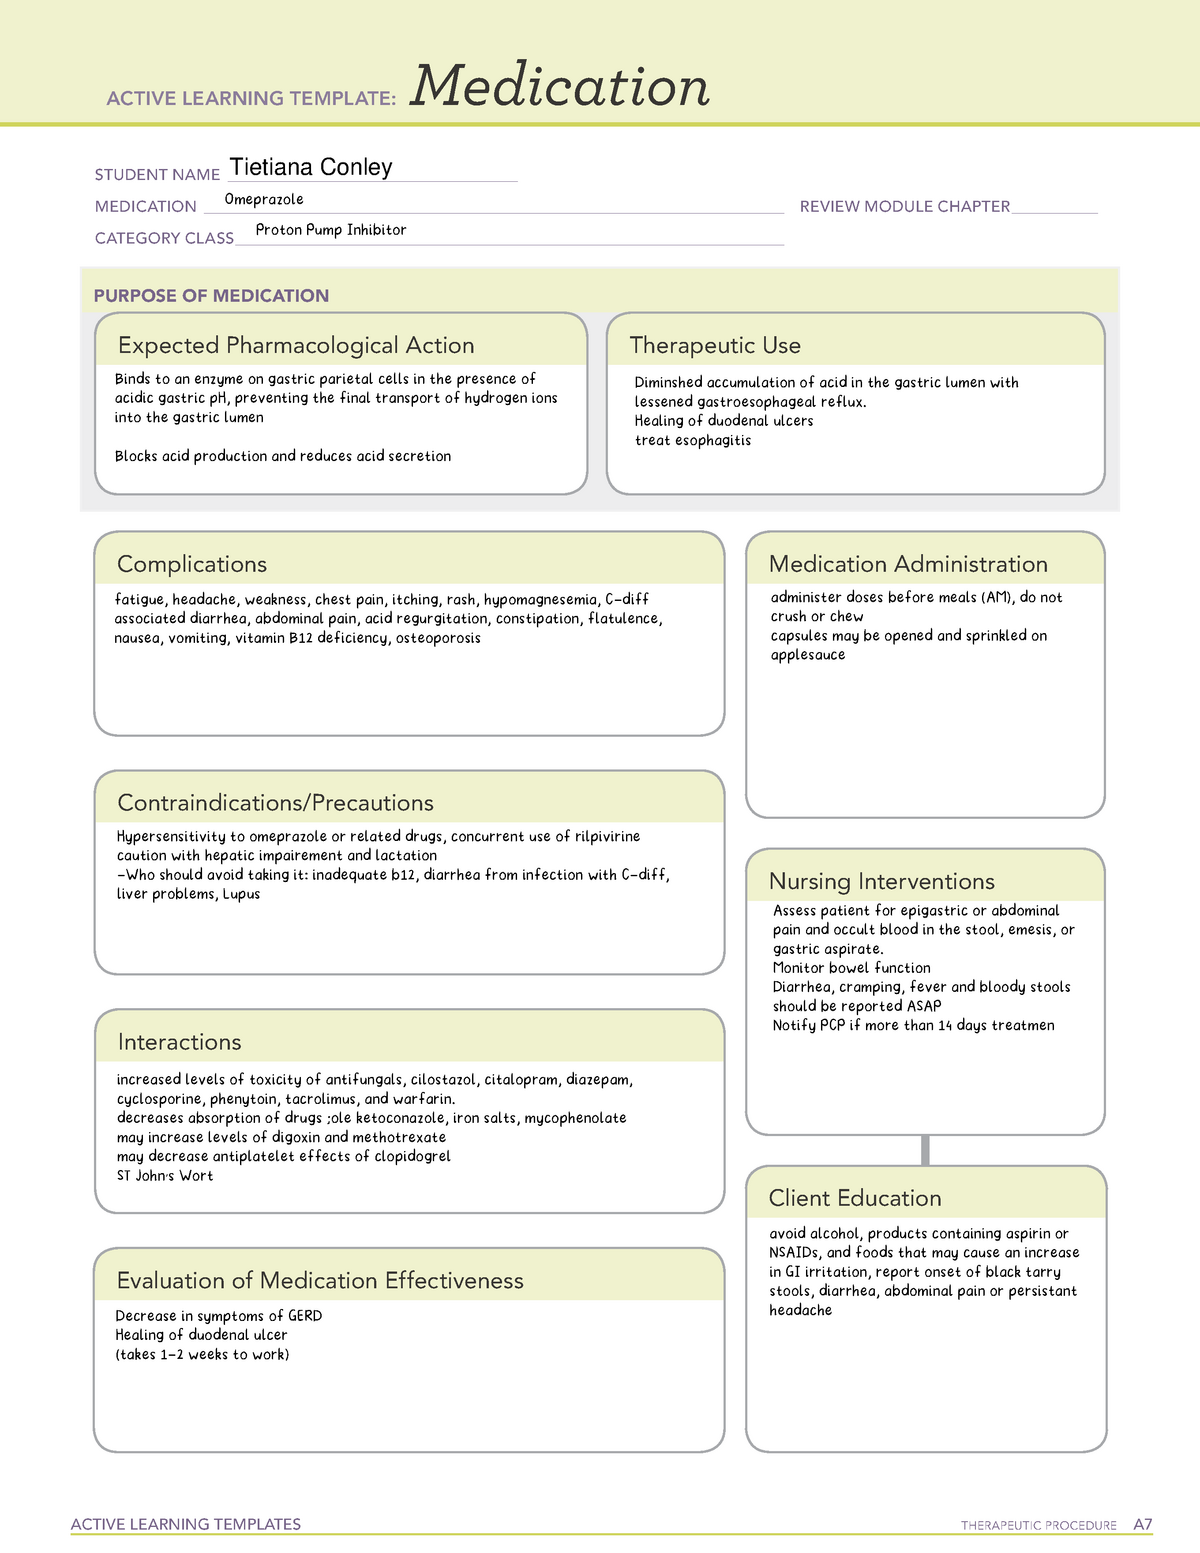 ati-learning-template-metoprolol-clinical-active-learning-templates-medication-student-name